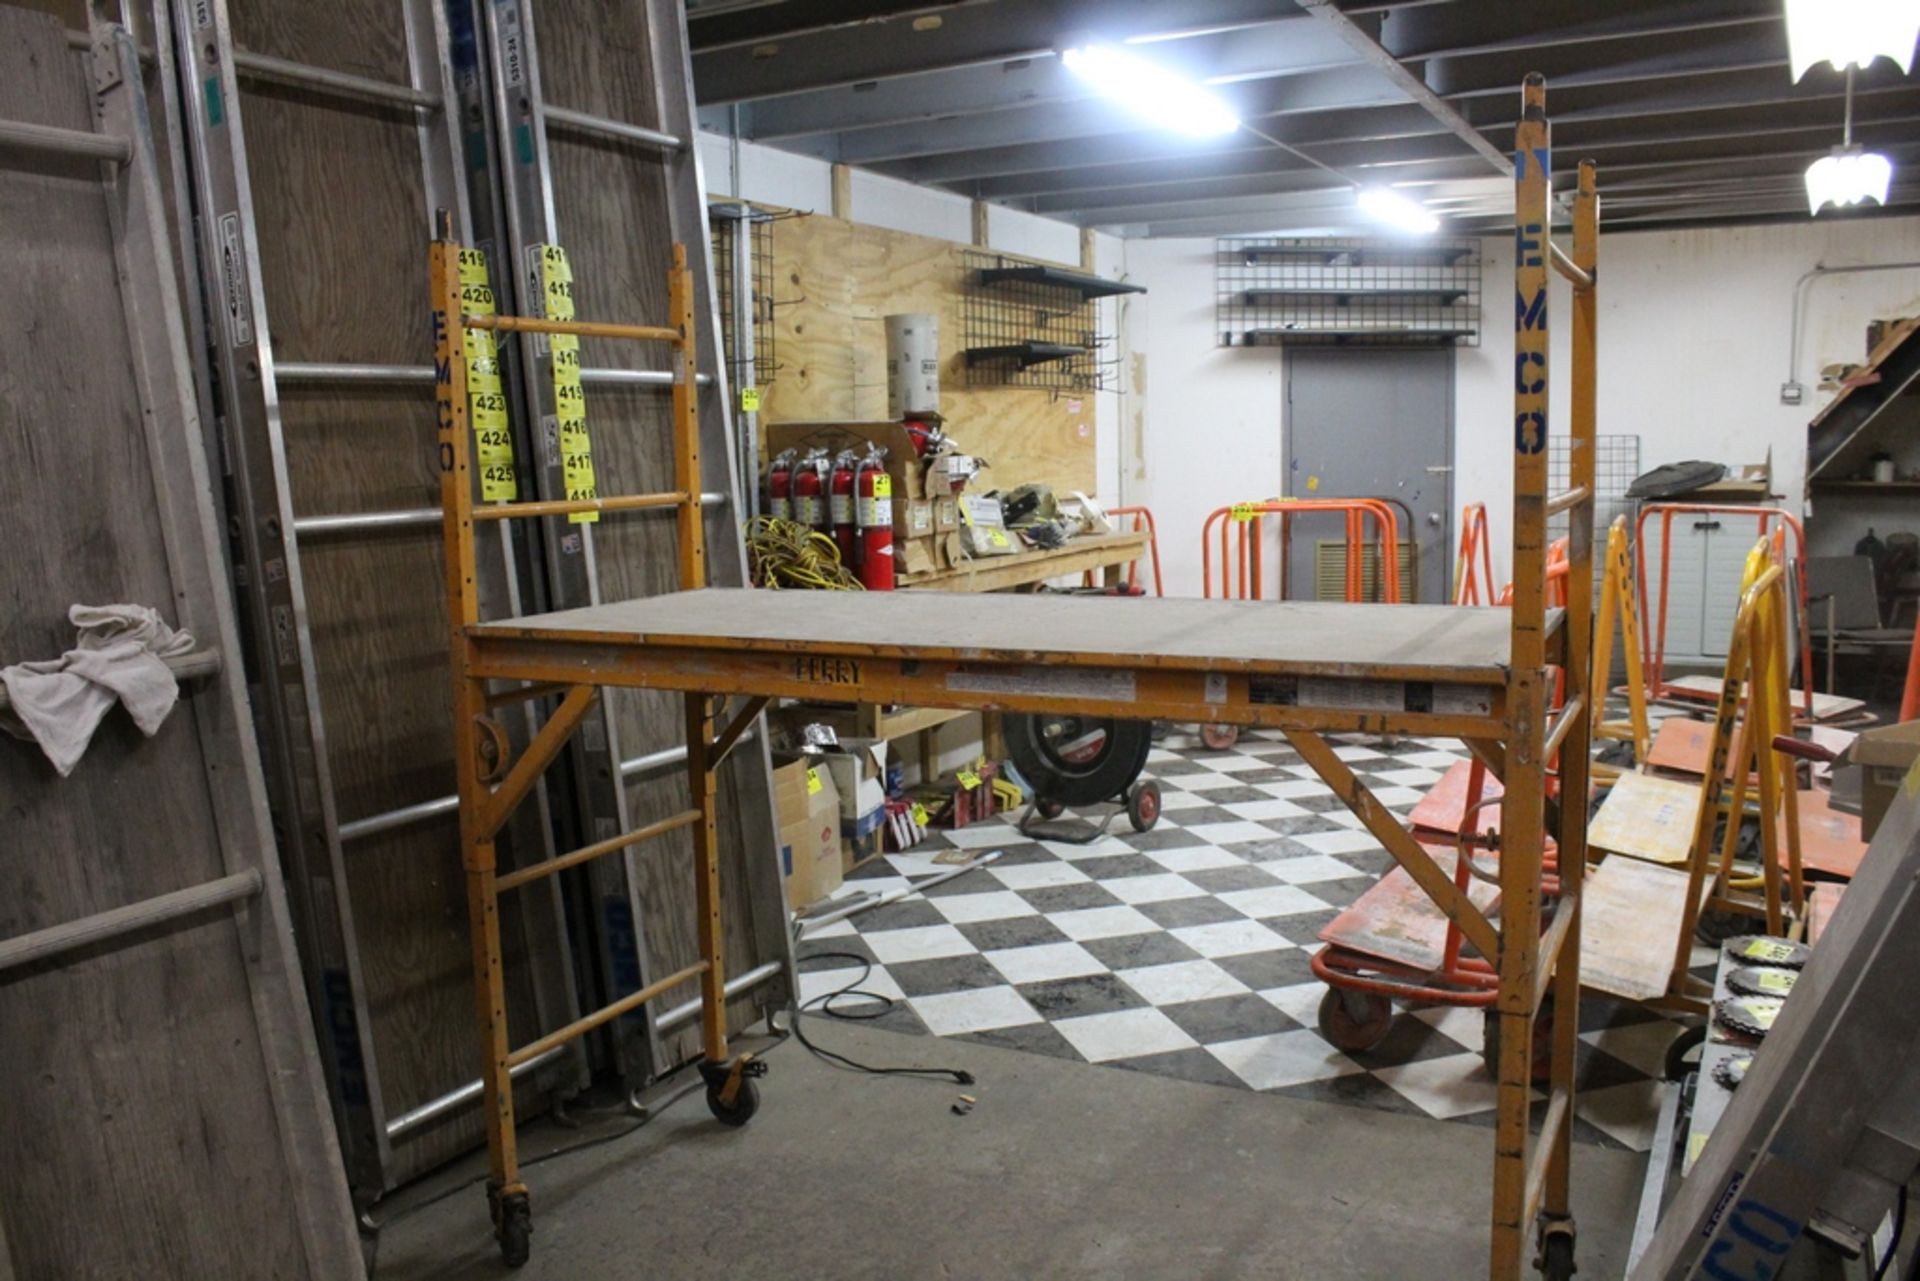 (2) PERRY 6' SCAFFOLDS, WITH (4) 72" 5-RUNG END FRAMES / LADDERS, (4) 6' TRUSSES, (2) PLATFORMS